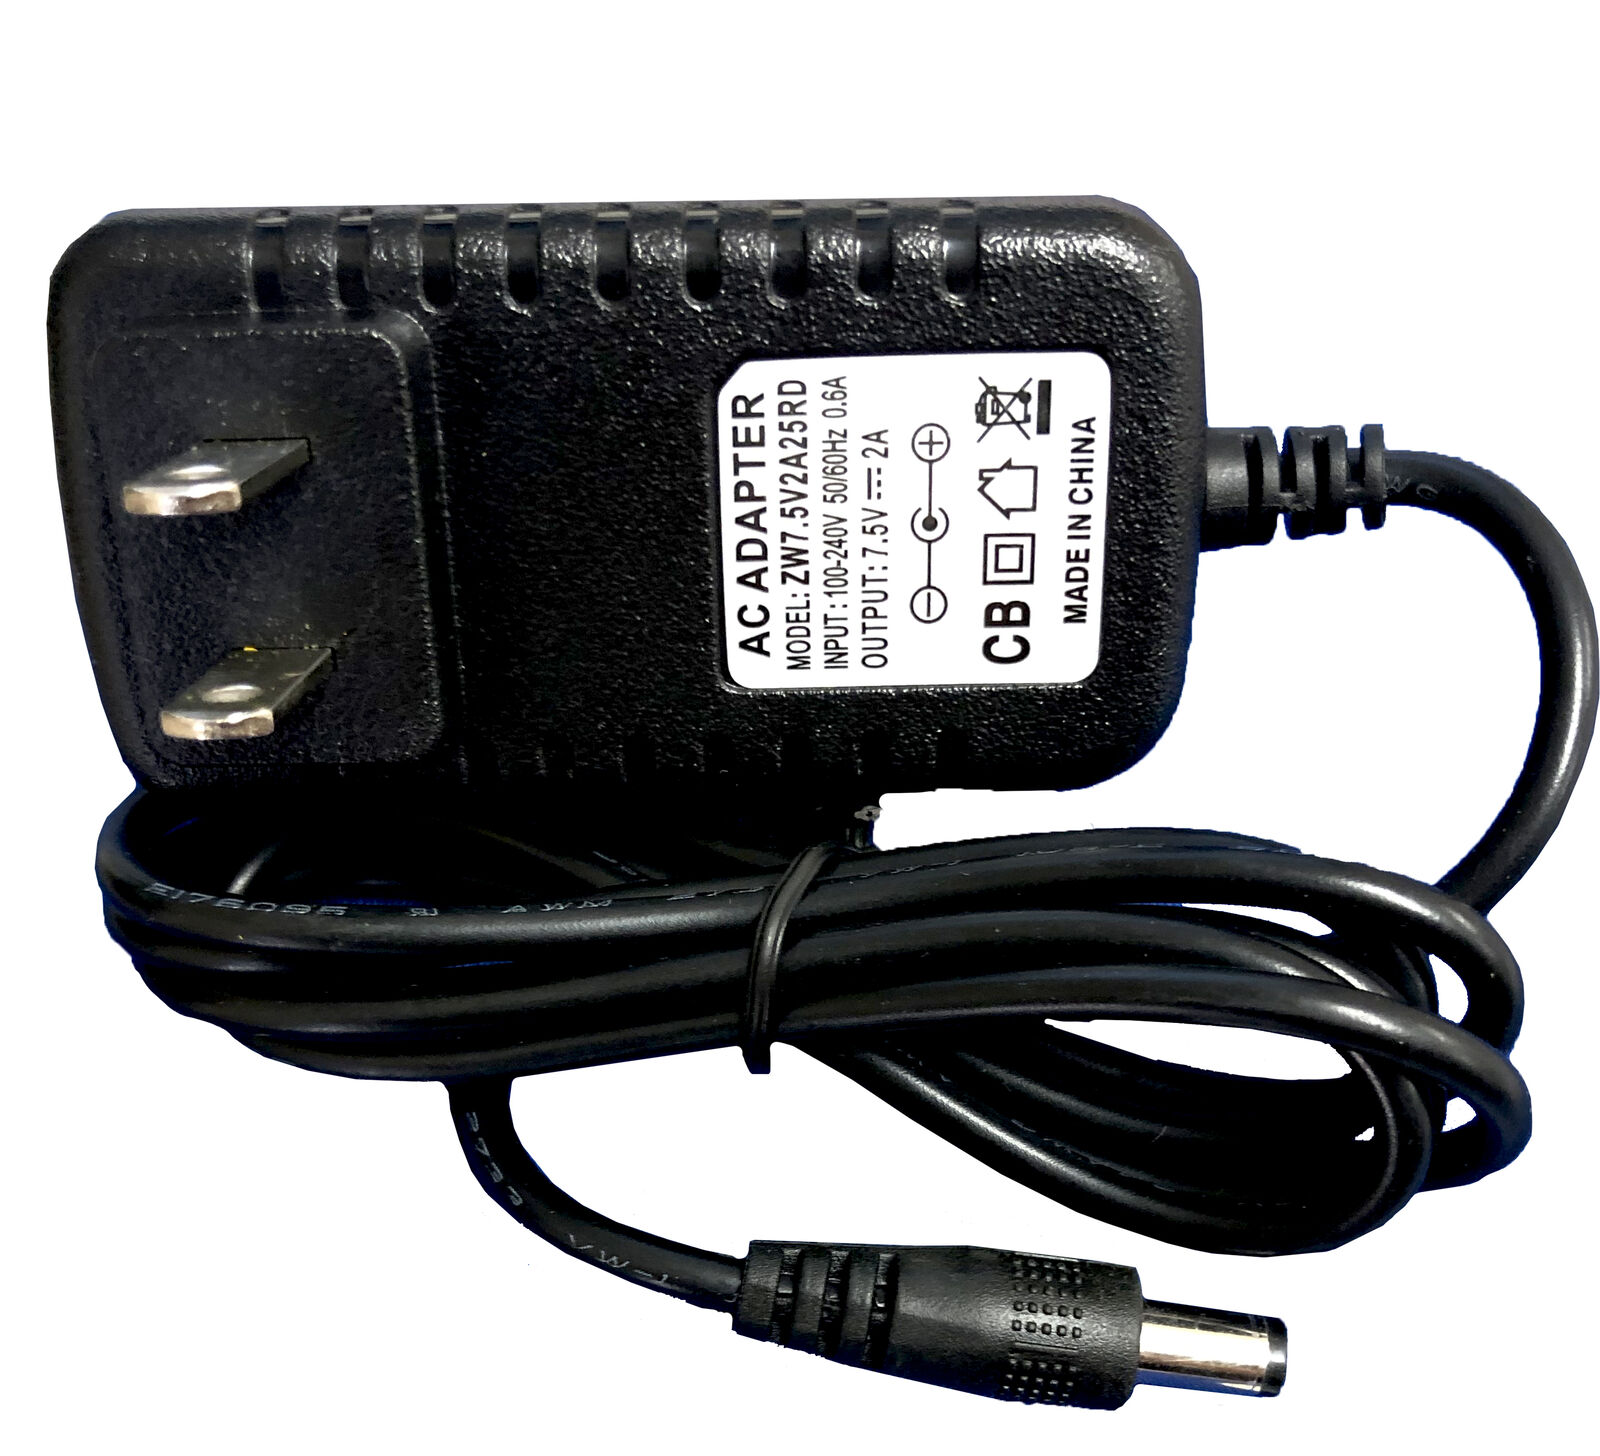 7.5V 2A 15W AC to DC Adapter Power supply charger For CASIO AD-1 SA-75 KEYBOARD Type: AC/DC Adapter MPN: Does Not App - Click Image to Close